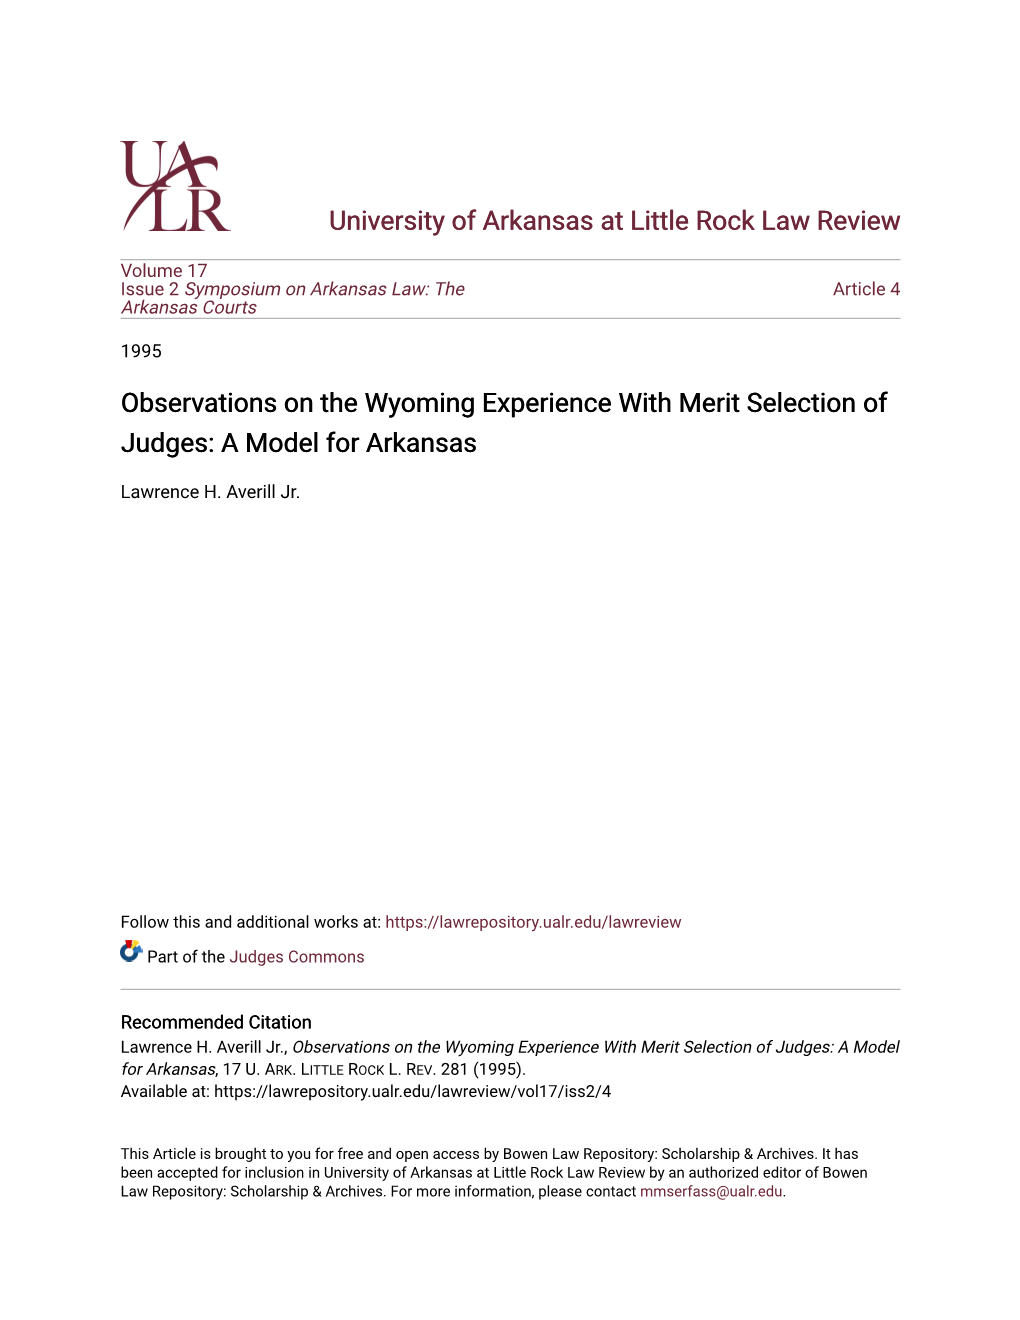 Observations on the Wyoming Experience with Merit Selection of Judges: a Model for Arkansas